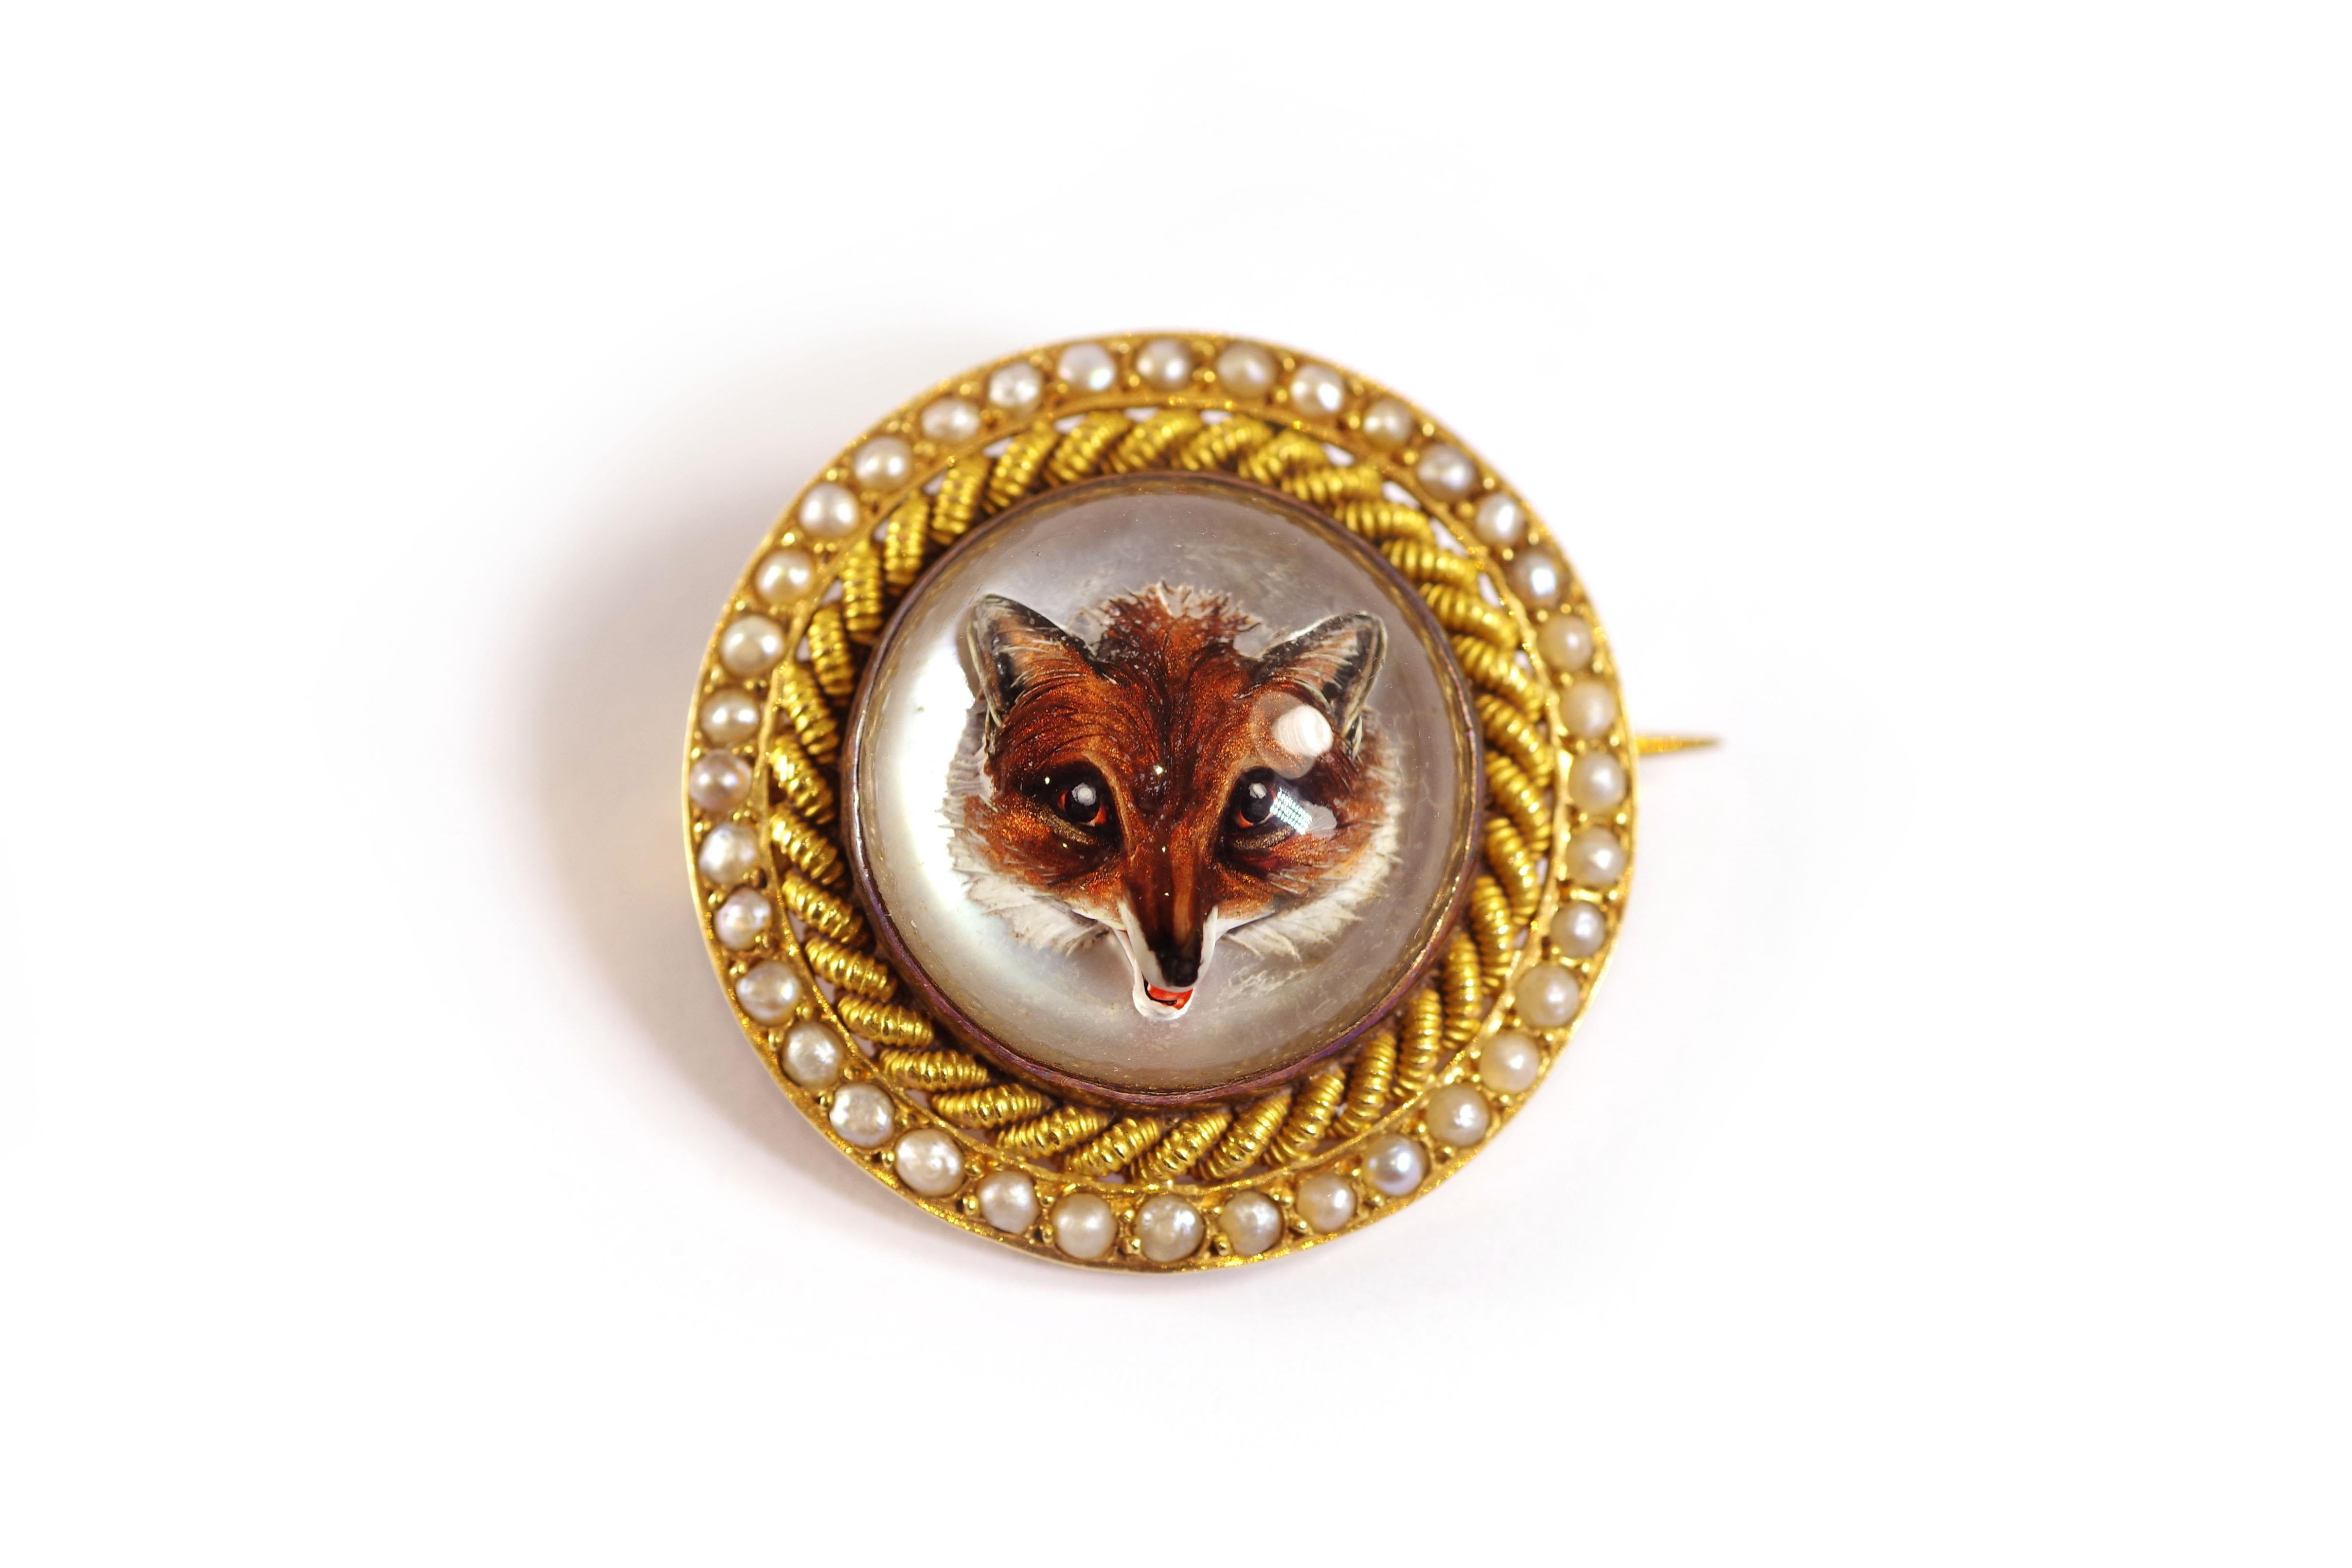 Fox crystal Essex brooch in 18 karat yellow gold. Antique English brooch with a large round Essex crystal, carved inside with a fox's head, on a white silvered background. The rock crystal is polished and in a closed setting, the outline of the